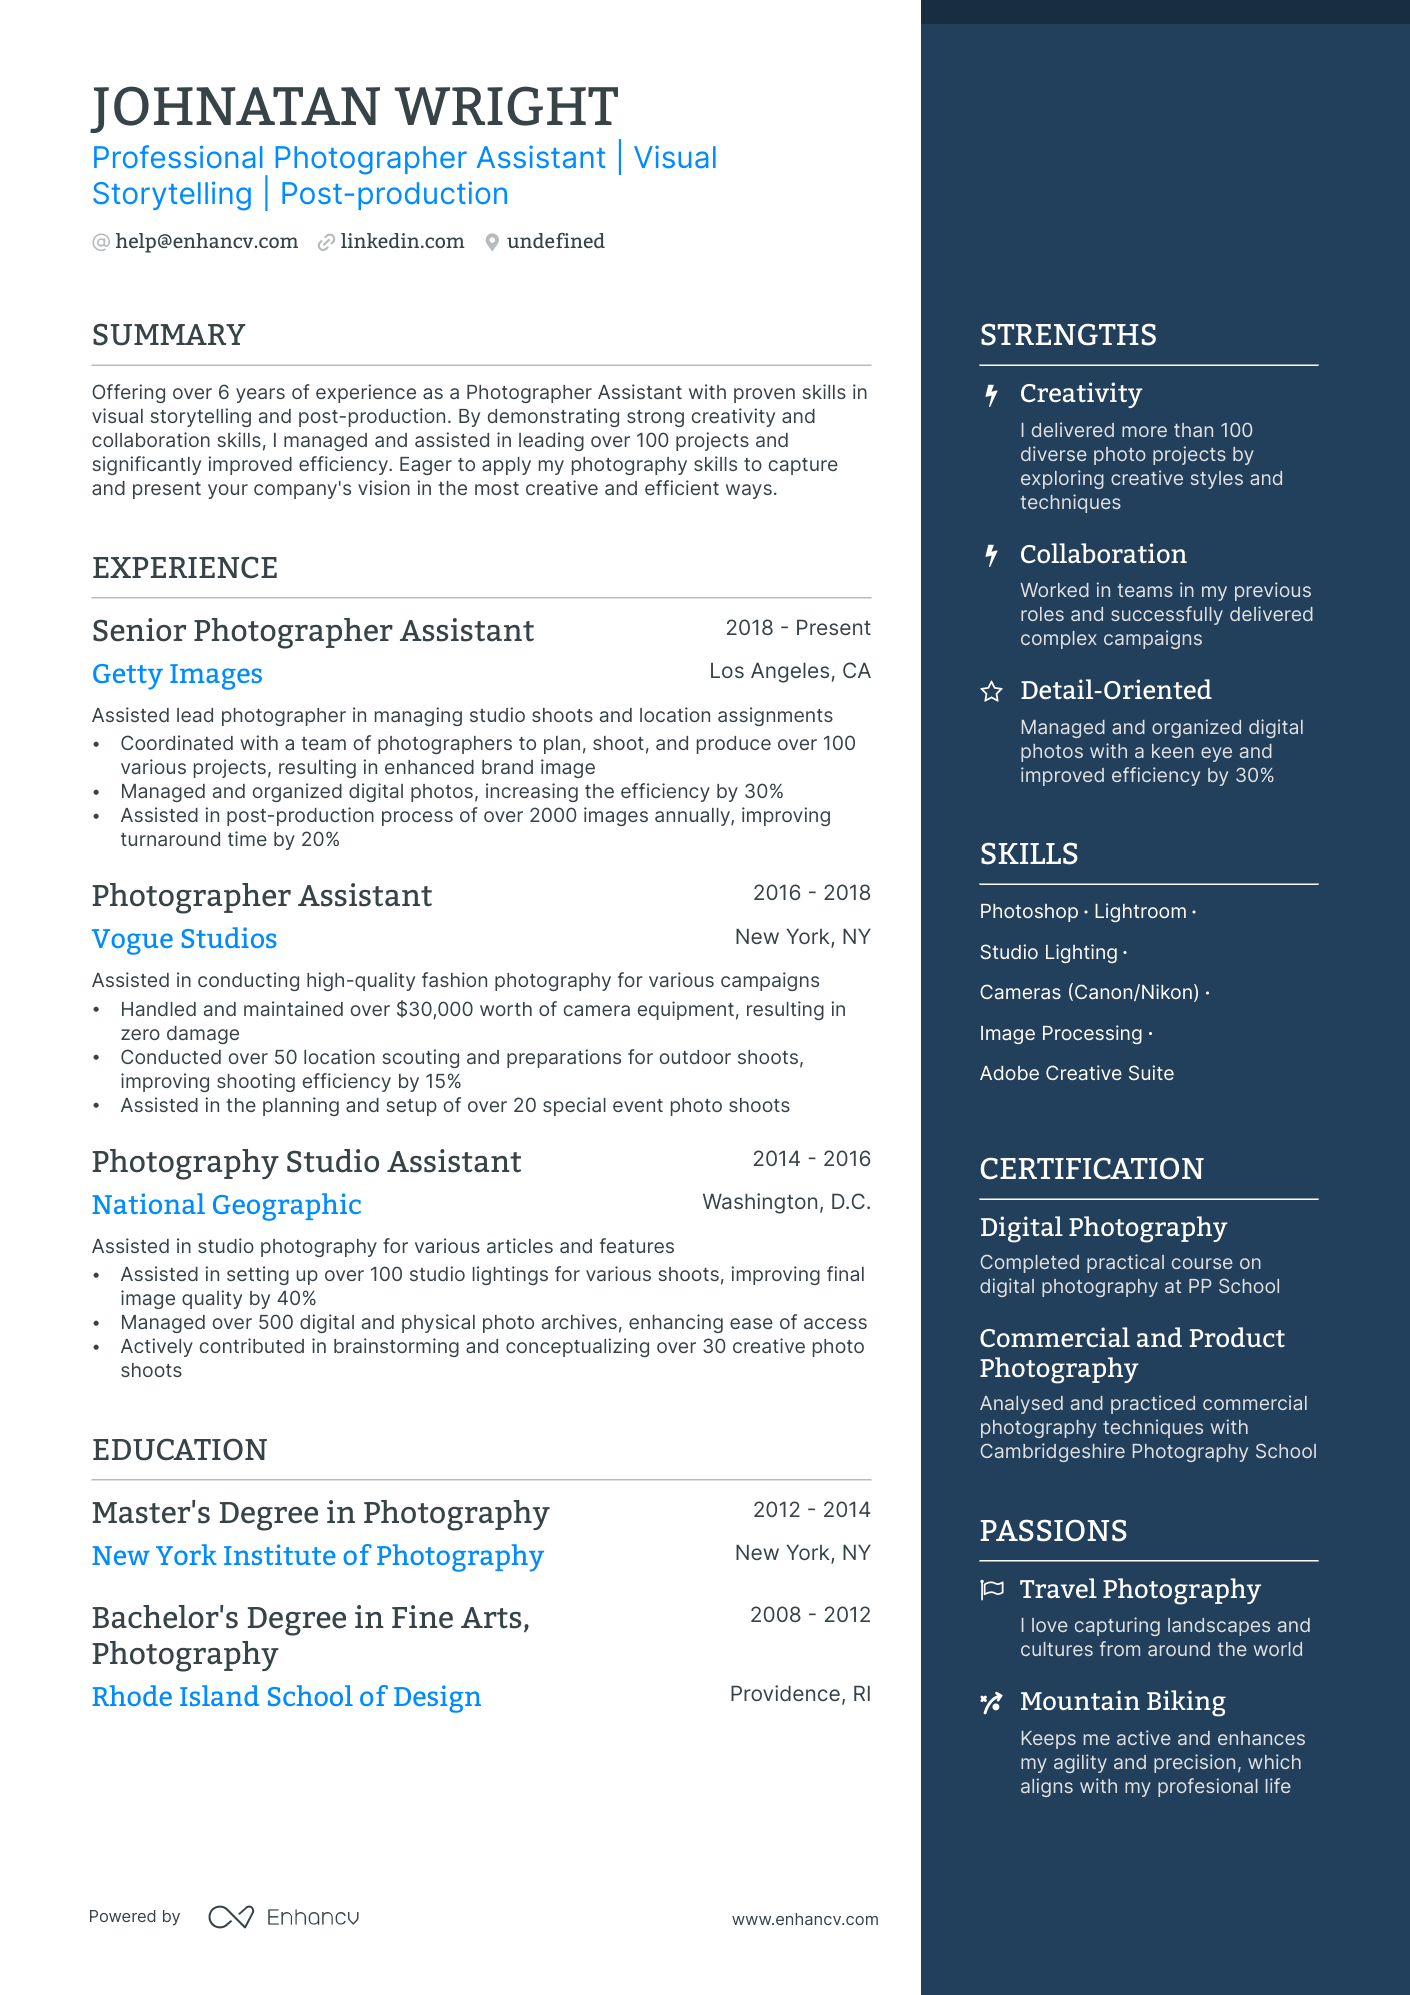 Photographer Assistant resume example